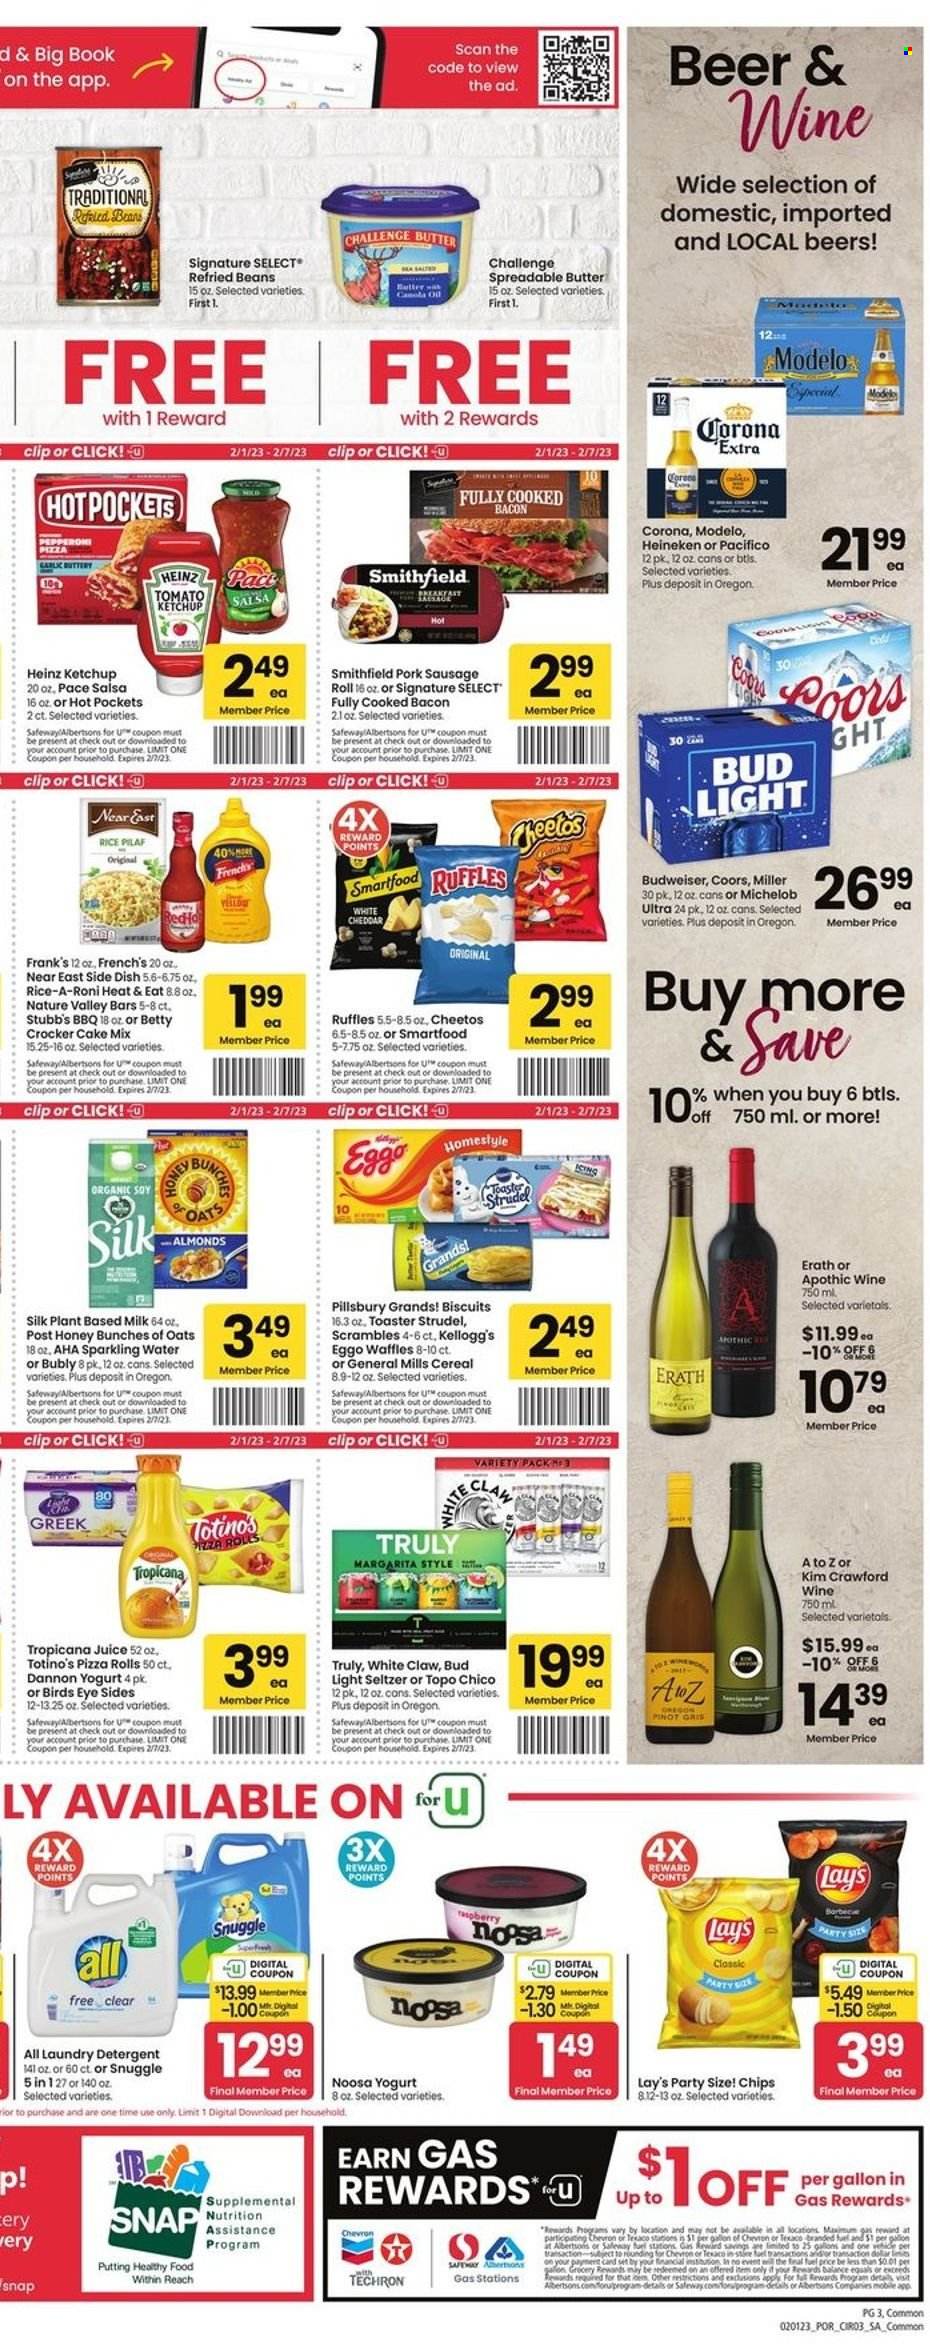 thumbnail - Safeway Flyer - 02/01/2023 - 02/07/2023 - Sales products - sausage rolls, pizza rolls, strudel, waffles, beans, garlic, hot pocket, pizza, Pillsbury, Bird's Eye, bacon, sausage, pork sausage, pepperoni, yoghurt, Dannon, milk, Silk, butter, spreadable butter, Kellogg's, biscuit, Cheetos, chips, Lay’s, Smartfood, Ruffles, refried beans, Heinz, cereals, Nature Valley, rice, ketchup, salsa, canola oil, oil, juice, sparkling water, white wine, wine, Pinot Grigio, White Claw, Hard Seltzer, TRULY, beer, Bud Light, Corona Extra, Heineken, Miller, Modelo, detergent, Snuggle, laundry detergent, Budweiser, Coors, Michelob. Page 3.